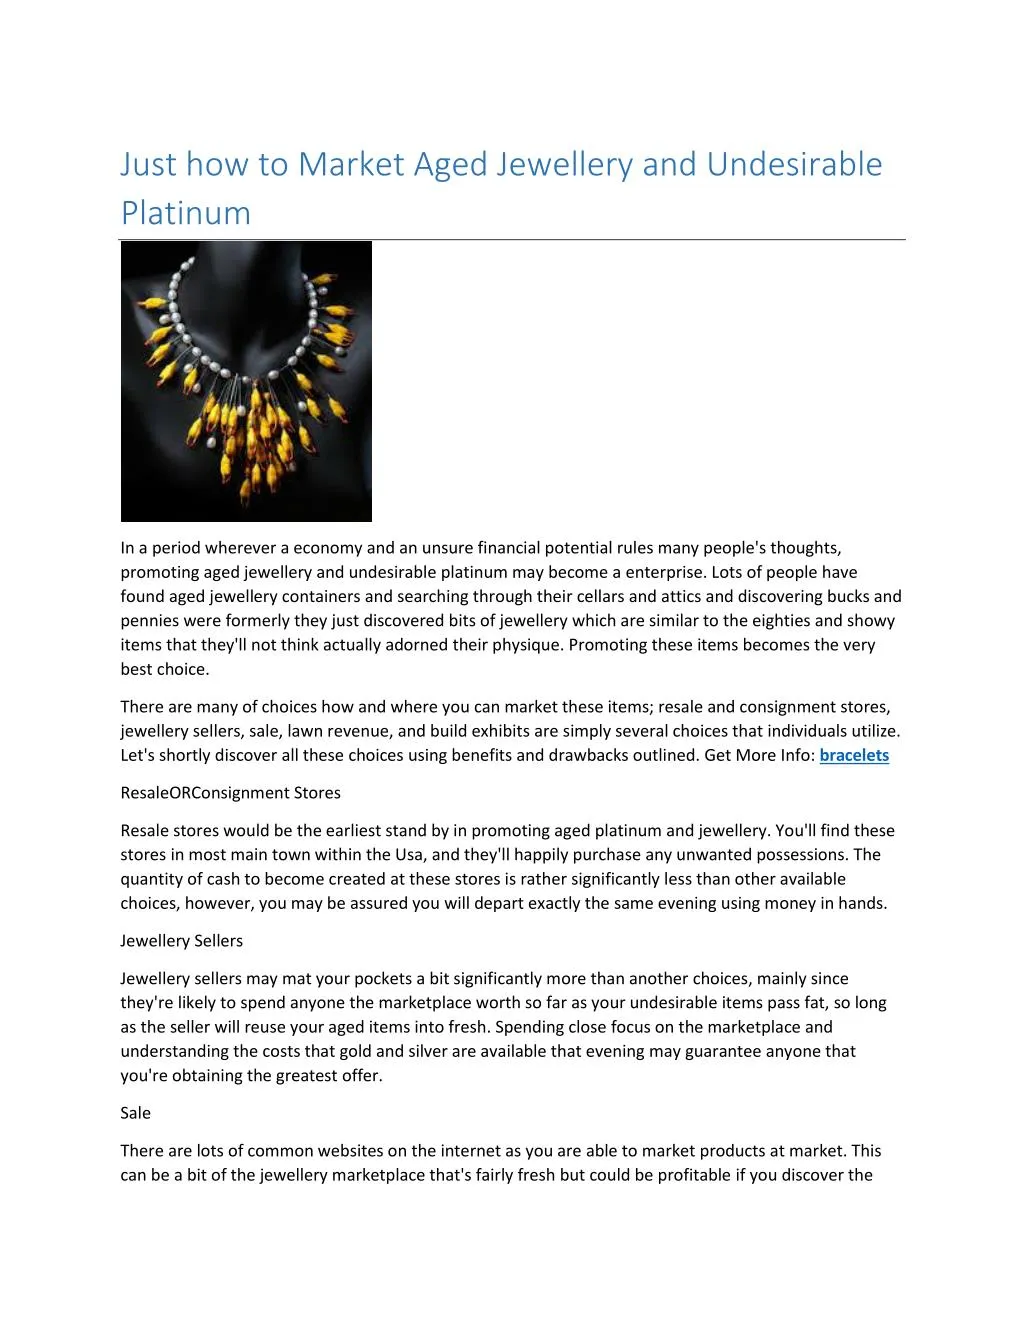 just how to market aged jewellery and undesirable